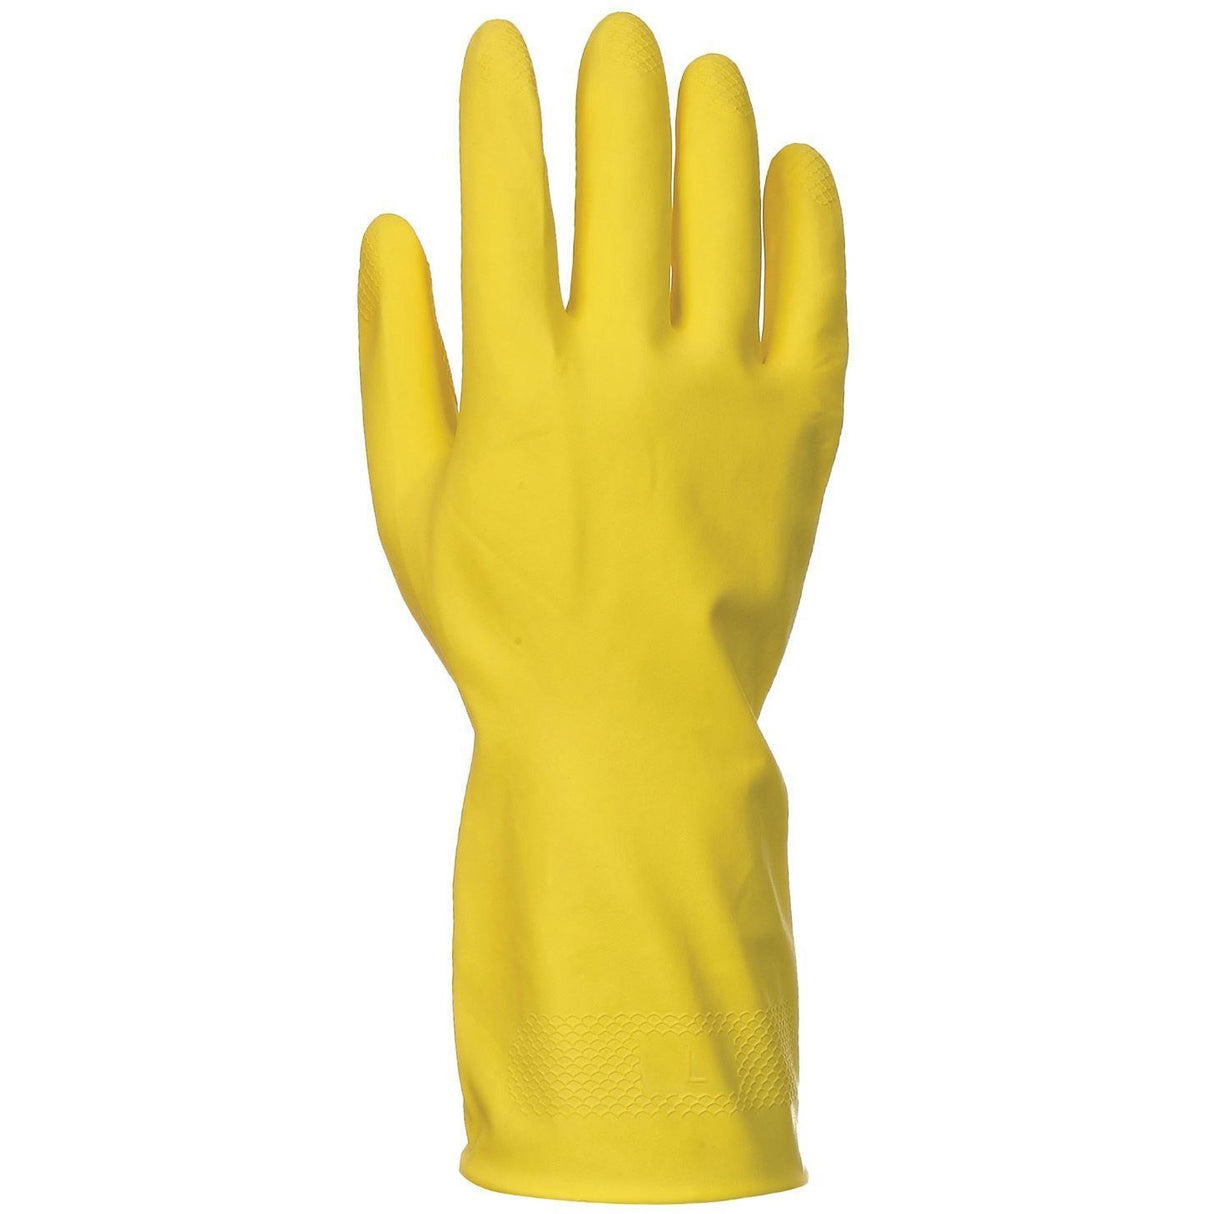 Portwest Household Latex Glove (Box of 240)